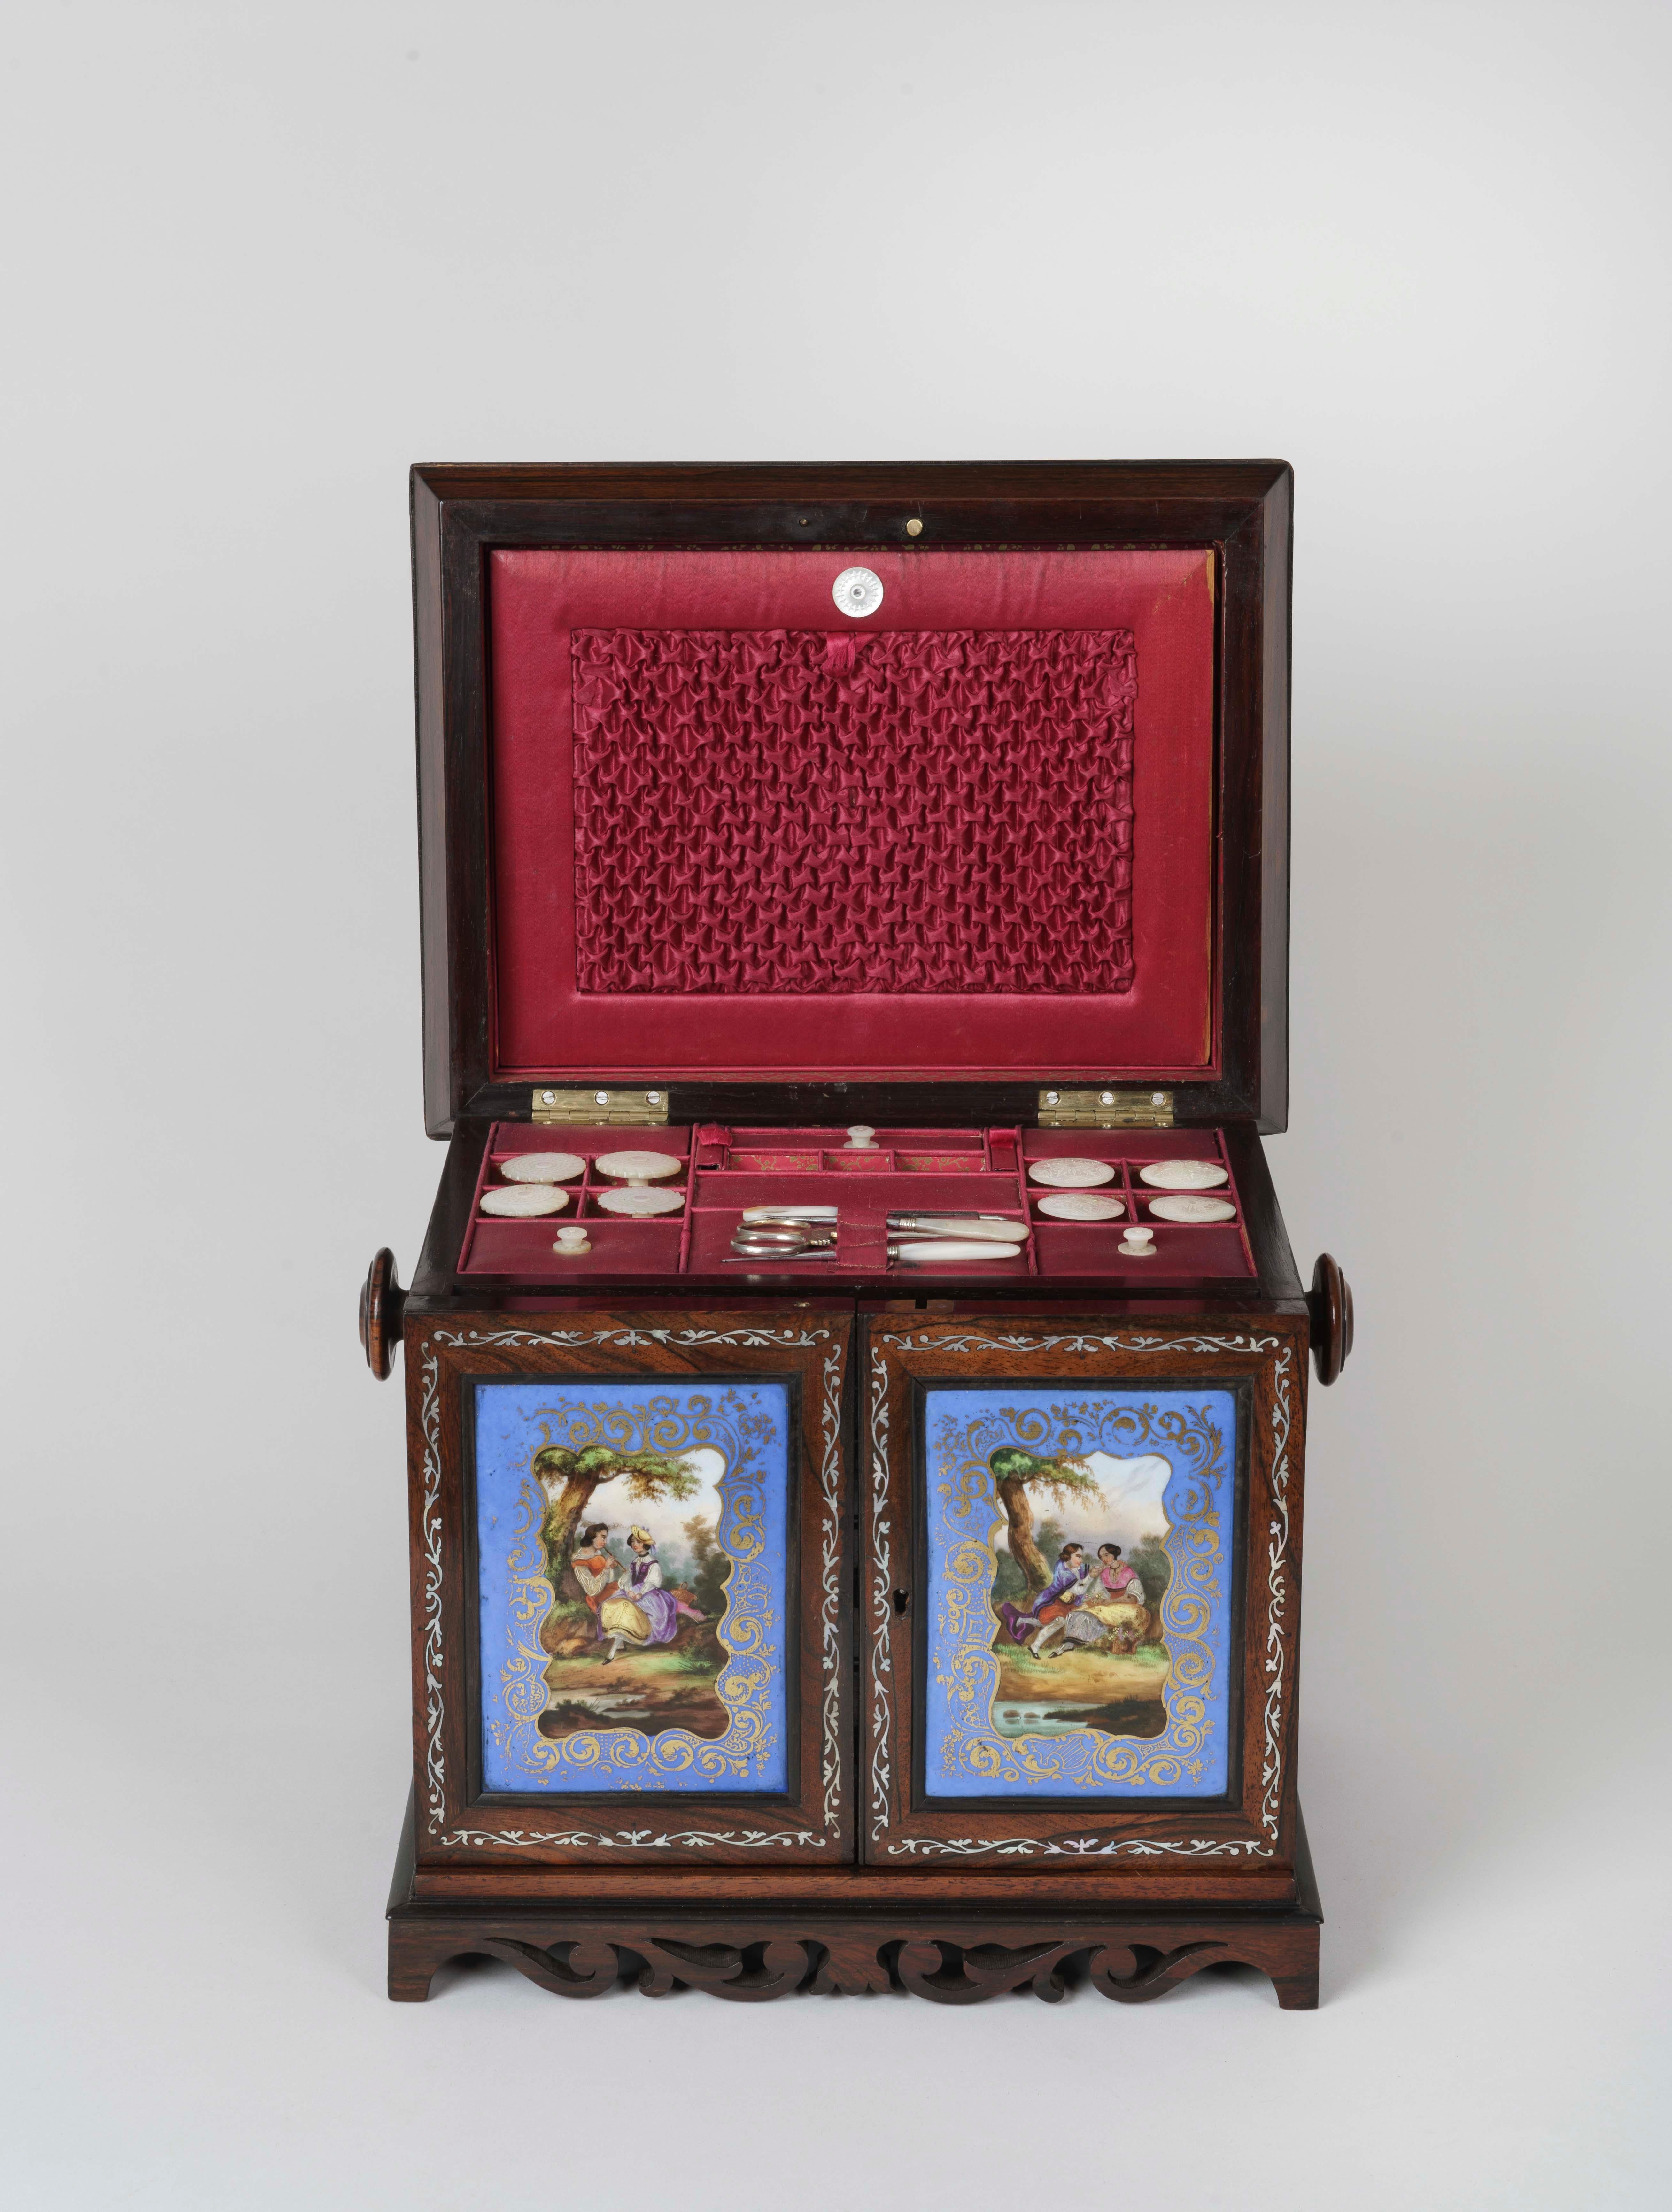 A Fine Table Cabinet

Rising from scrolling foliate bracket feet, the rectangular cabinet constructed in rosewood and surmounted with a hinged cavetto moulded lid set with a Sèvres-style porcelain plaque and a mother-of-pearl inlaid border, the lid